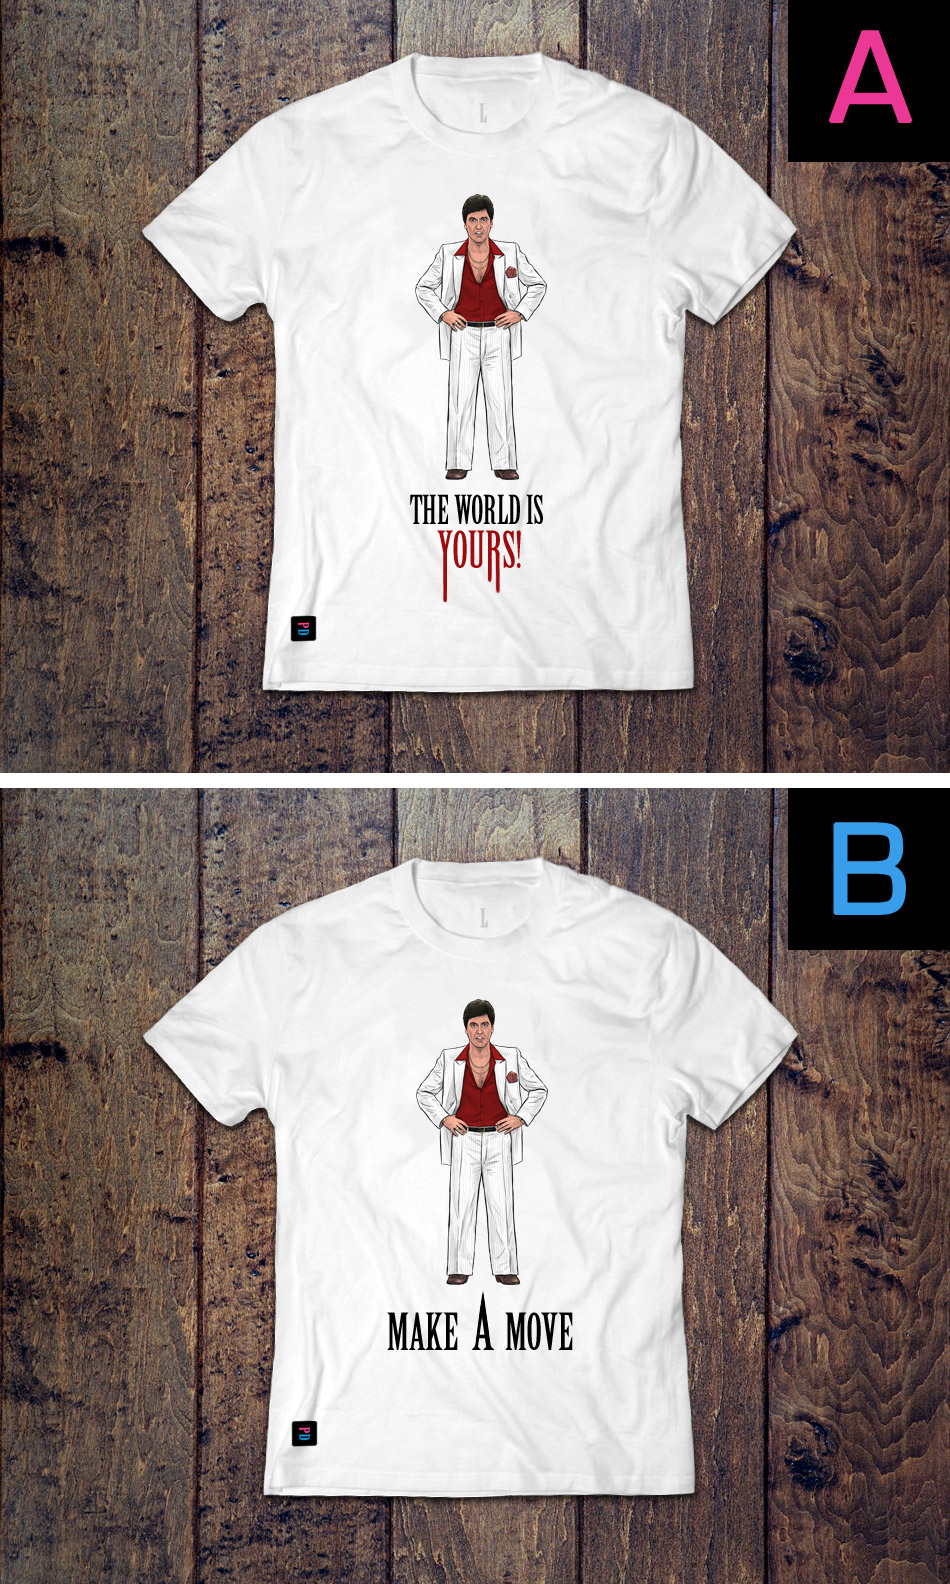 The Eyes, Chico. They Never Lie PD T-Shirt designs by Marten Go aka MGO